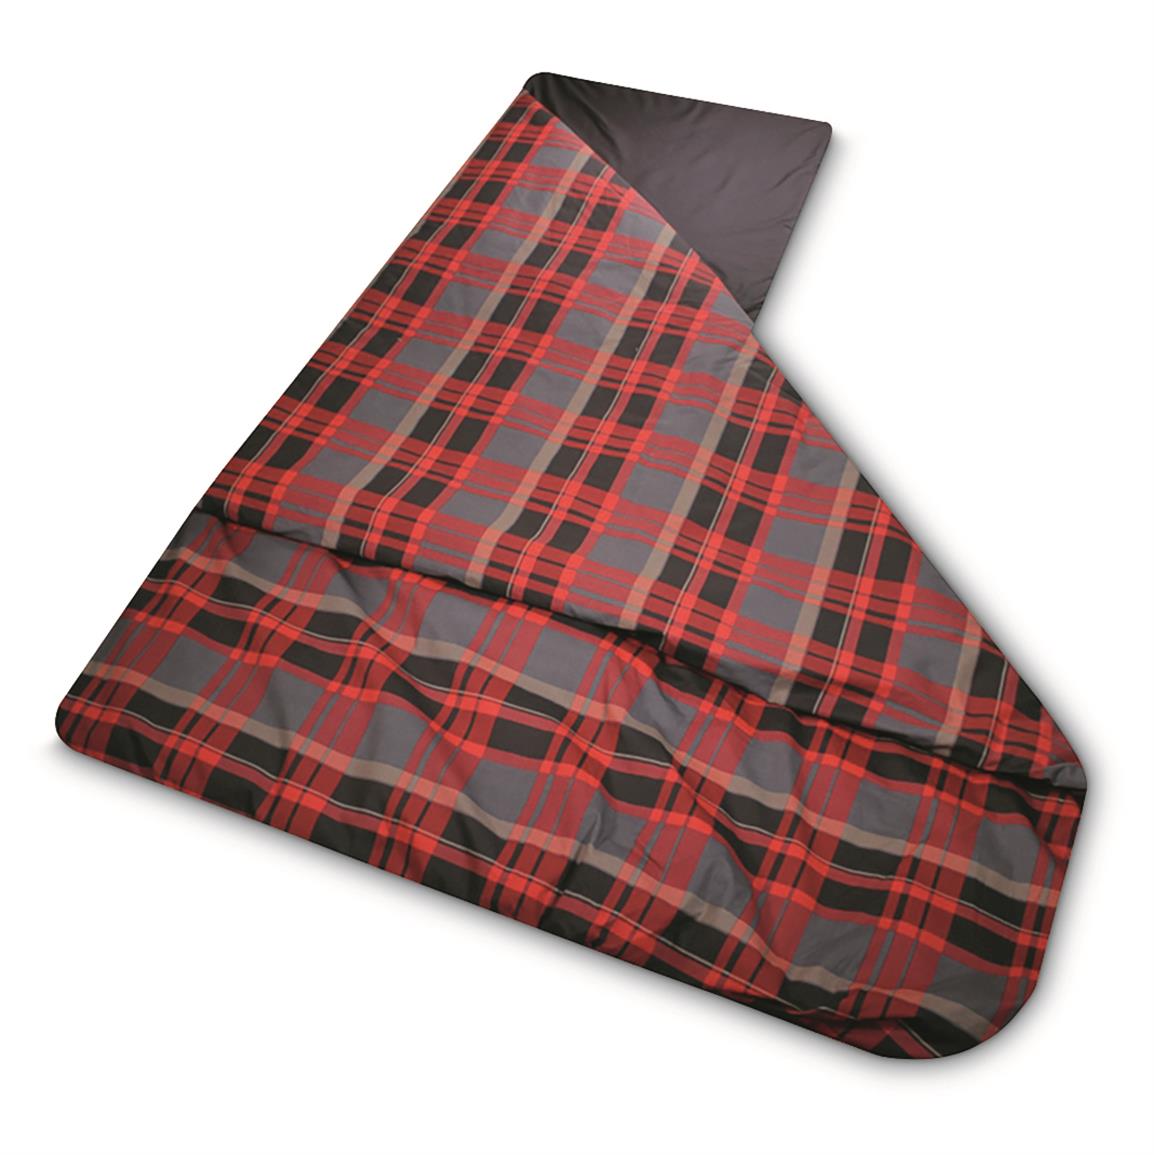 Duvet and pad cover remove for washing , Lumberjack